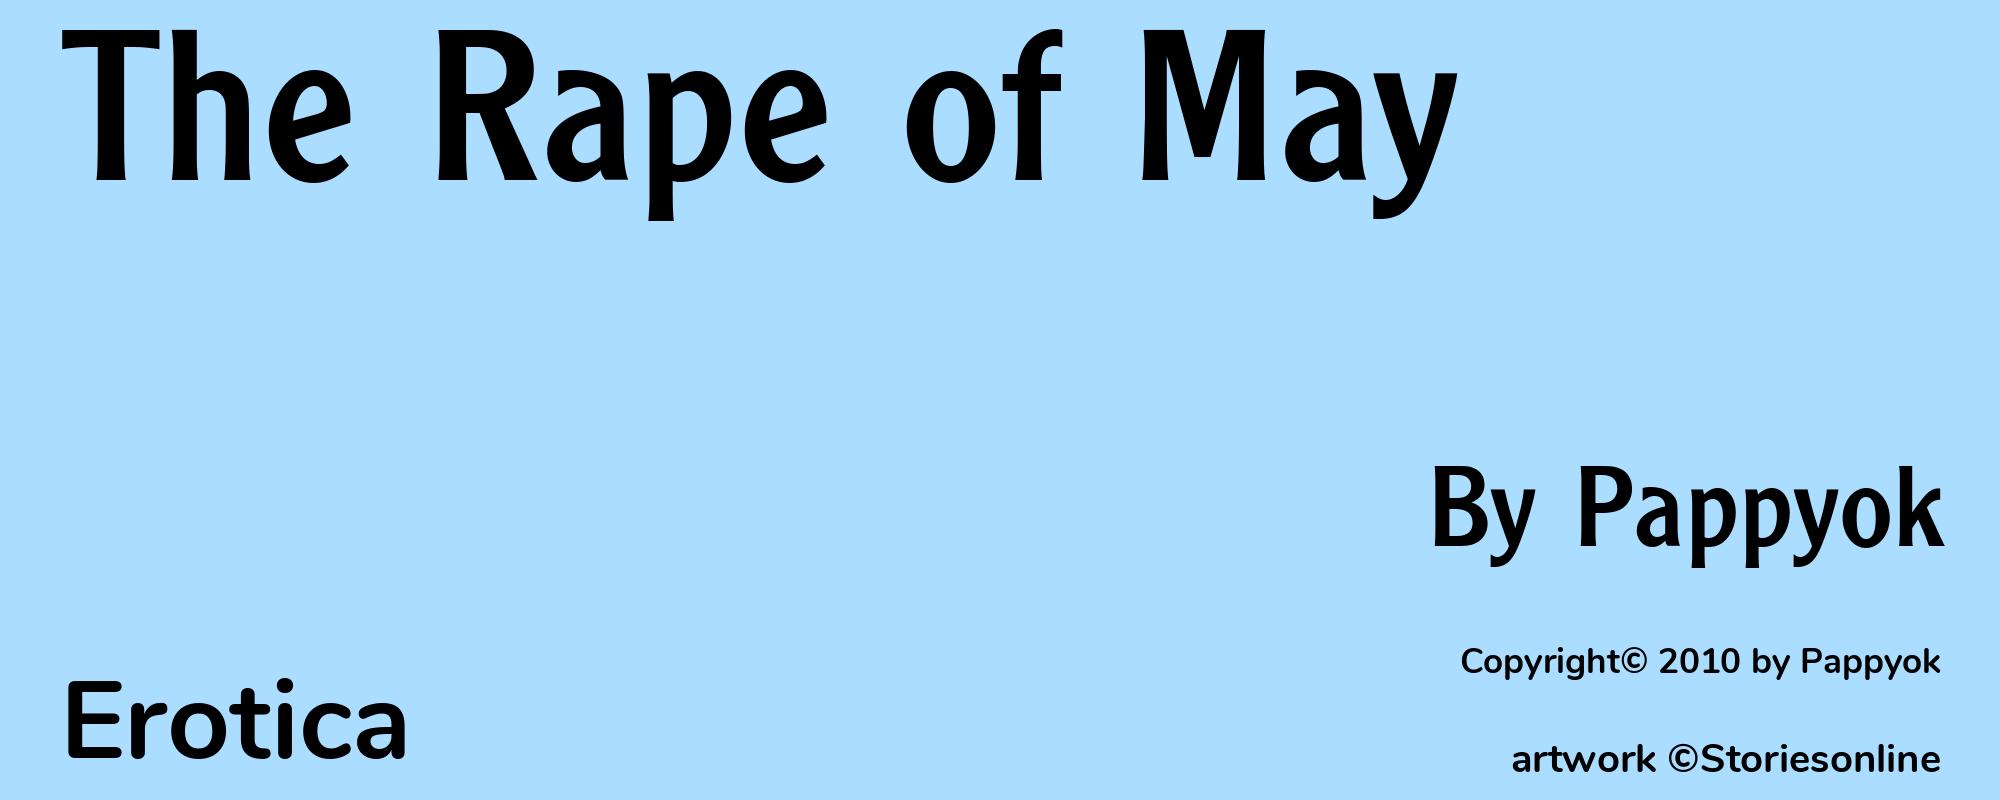 The Rape of May - Cover